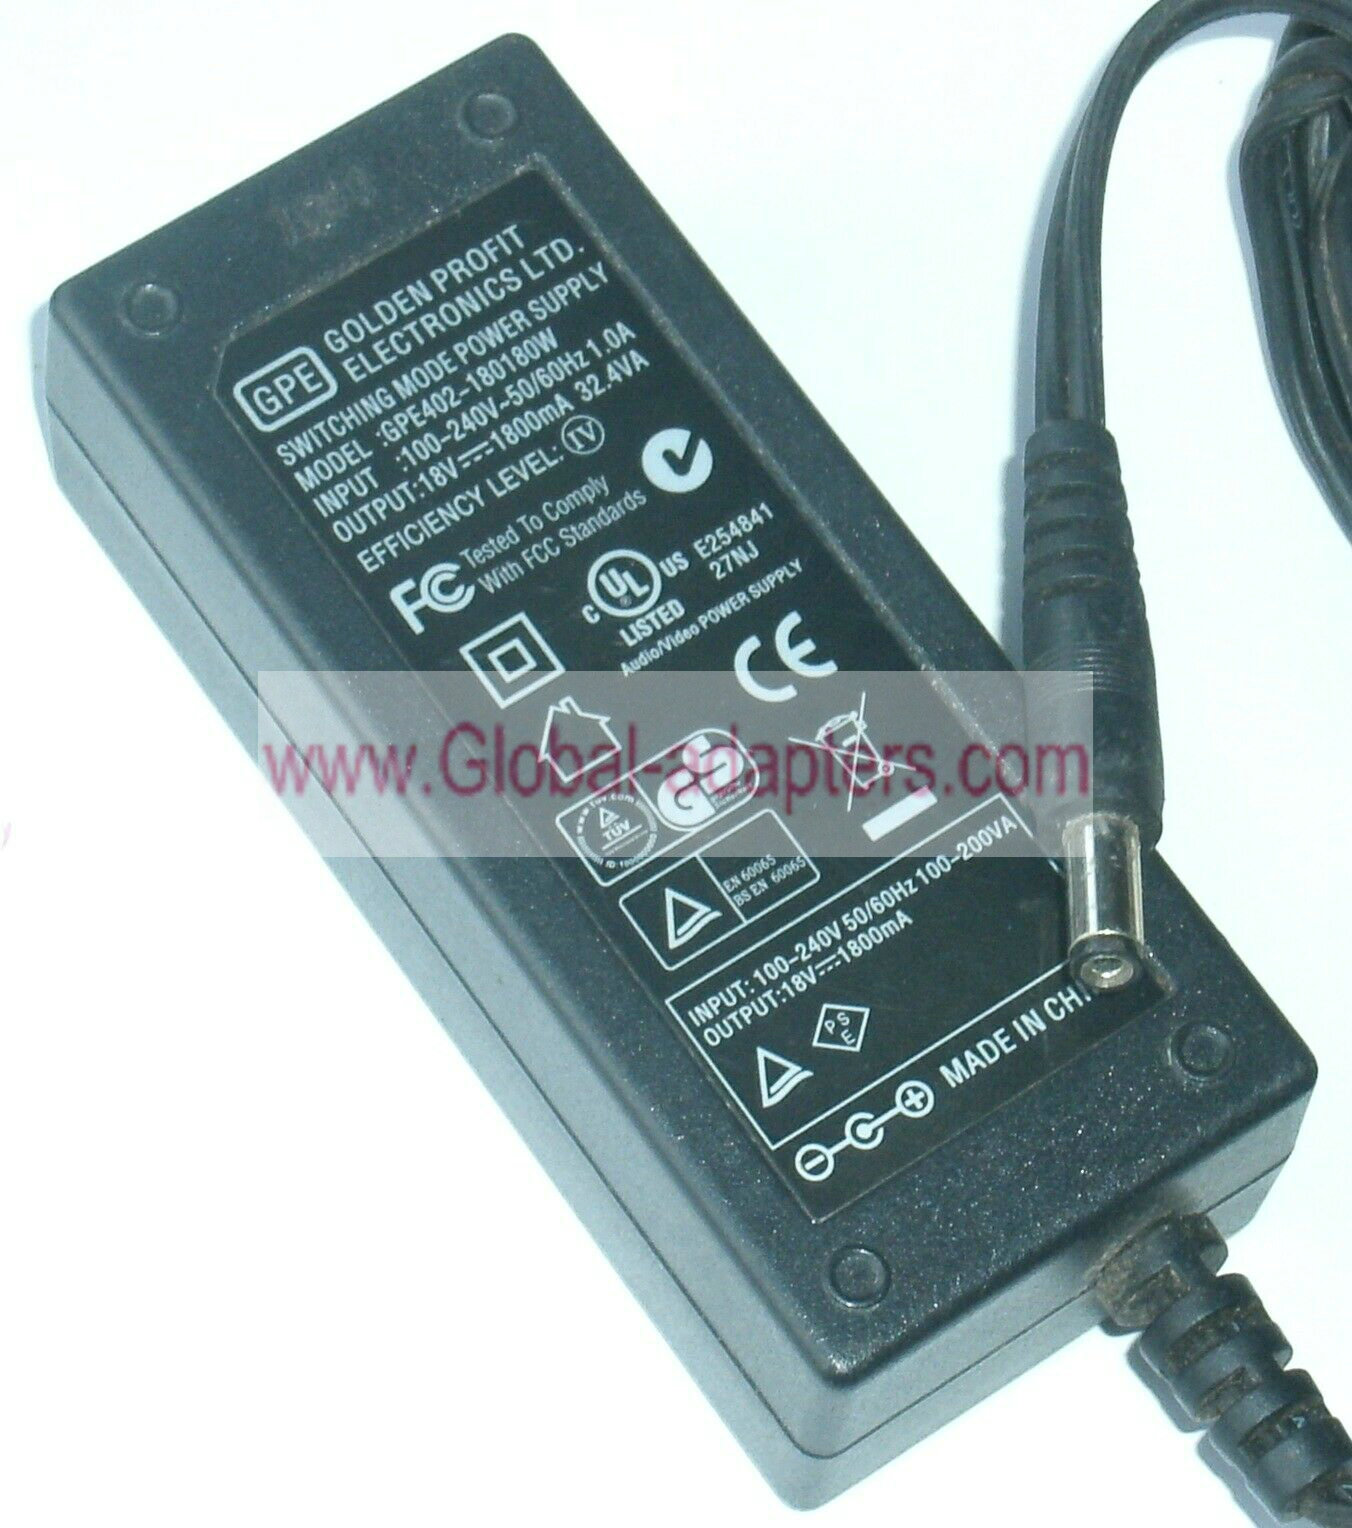 New GPE GPE402-180180W 18V 1800mA SWITCHING POWER SUPPLY